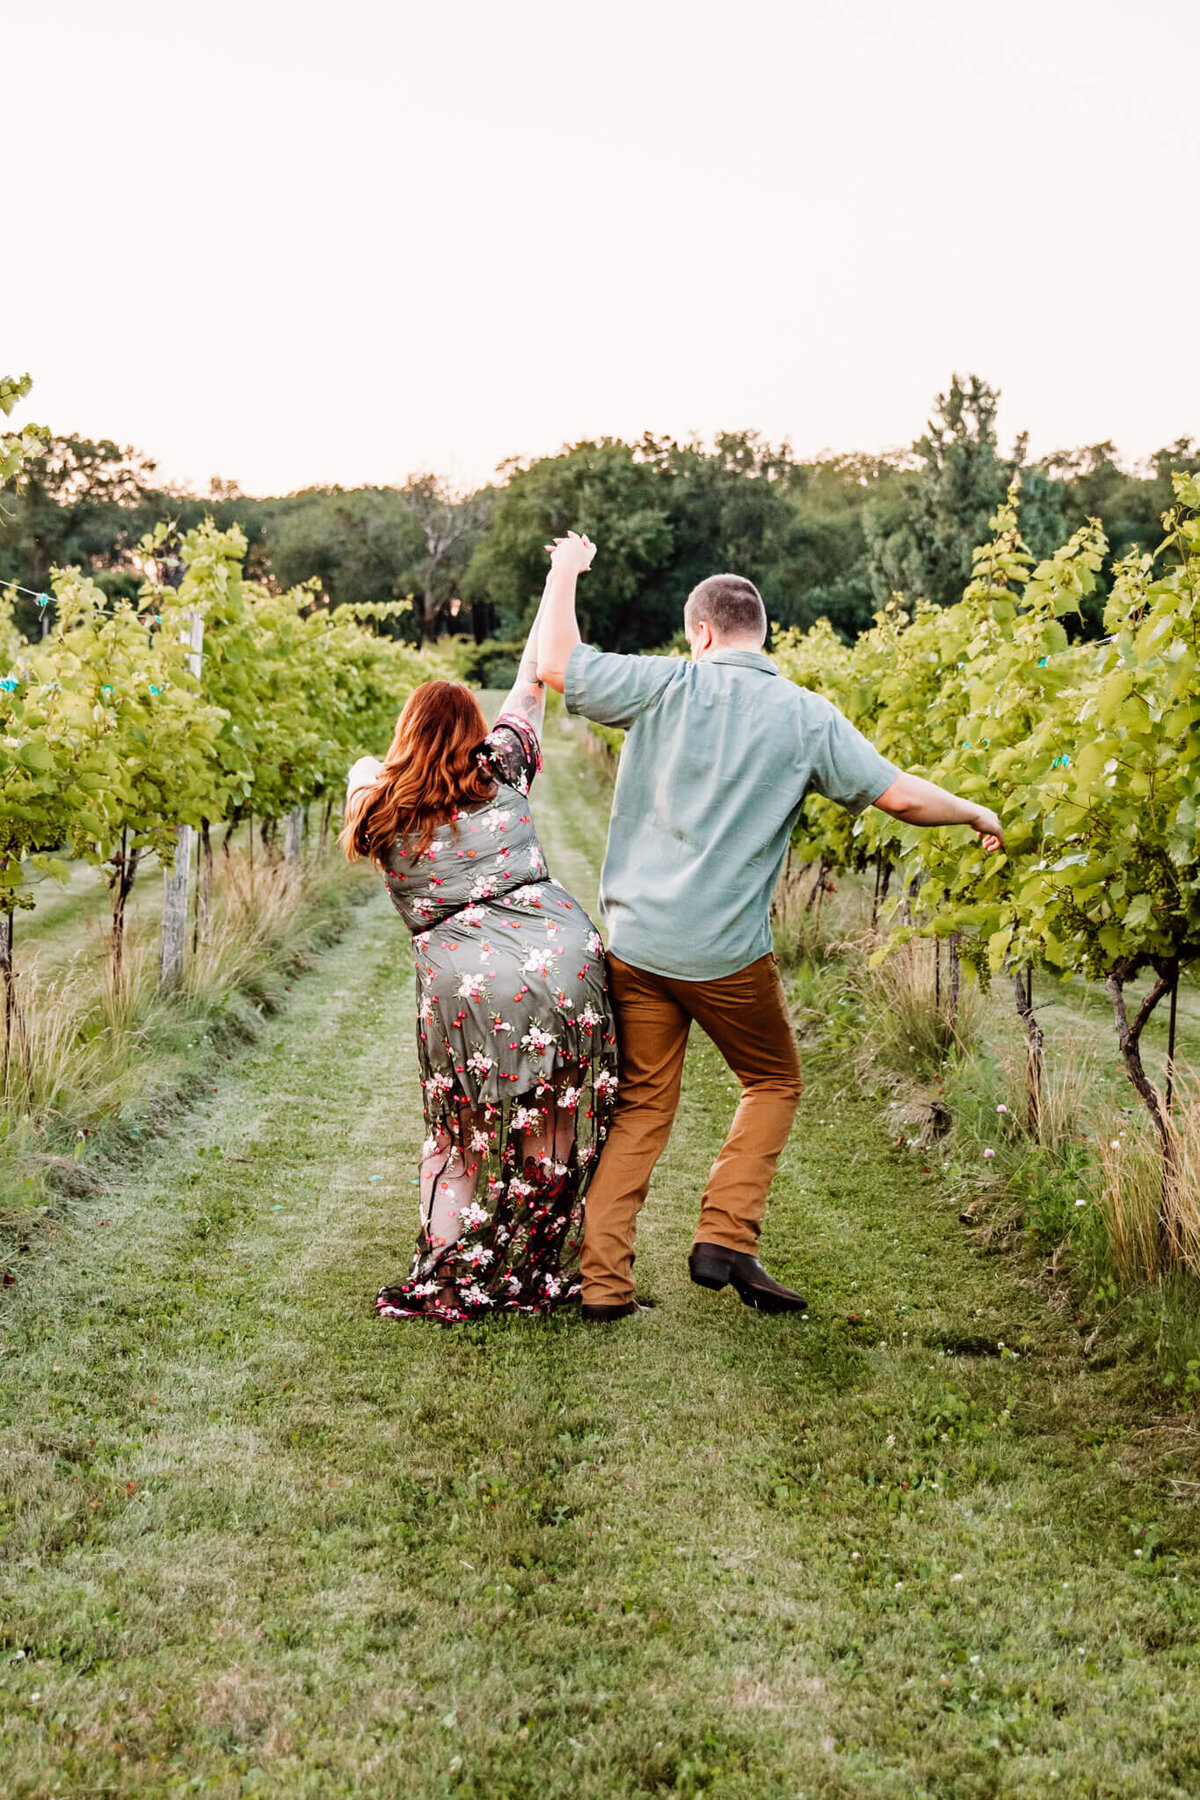 fun couple bumping hips at a winery in Ripon Wi for their couples photos